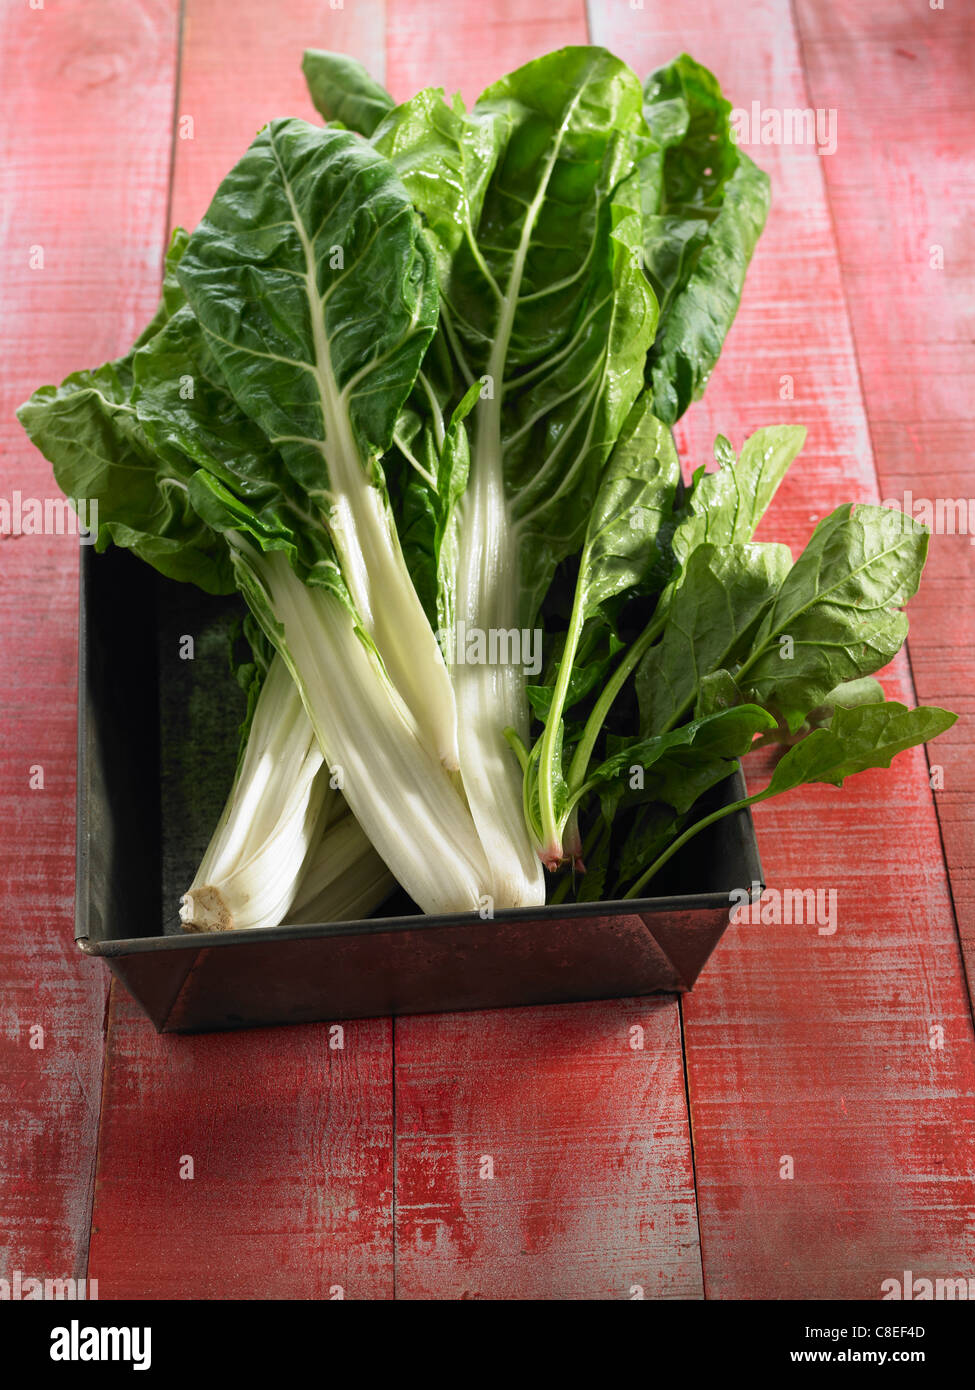 Swiss chard and spinach Stock Photo